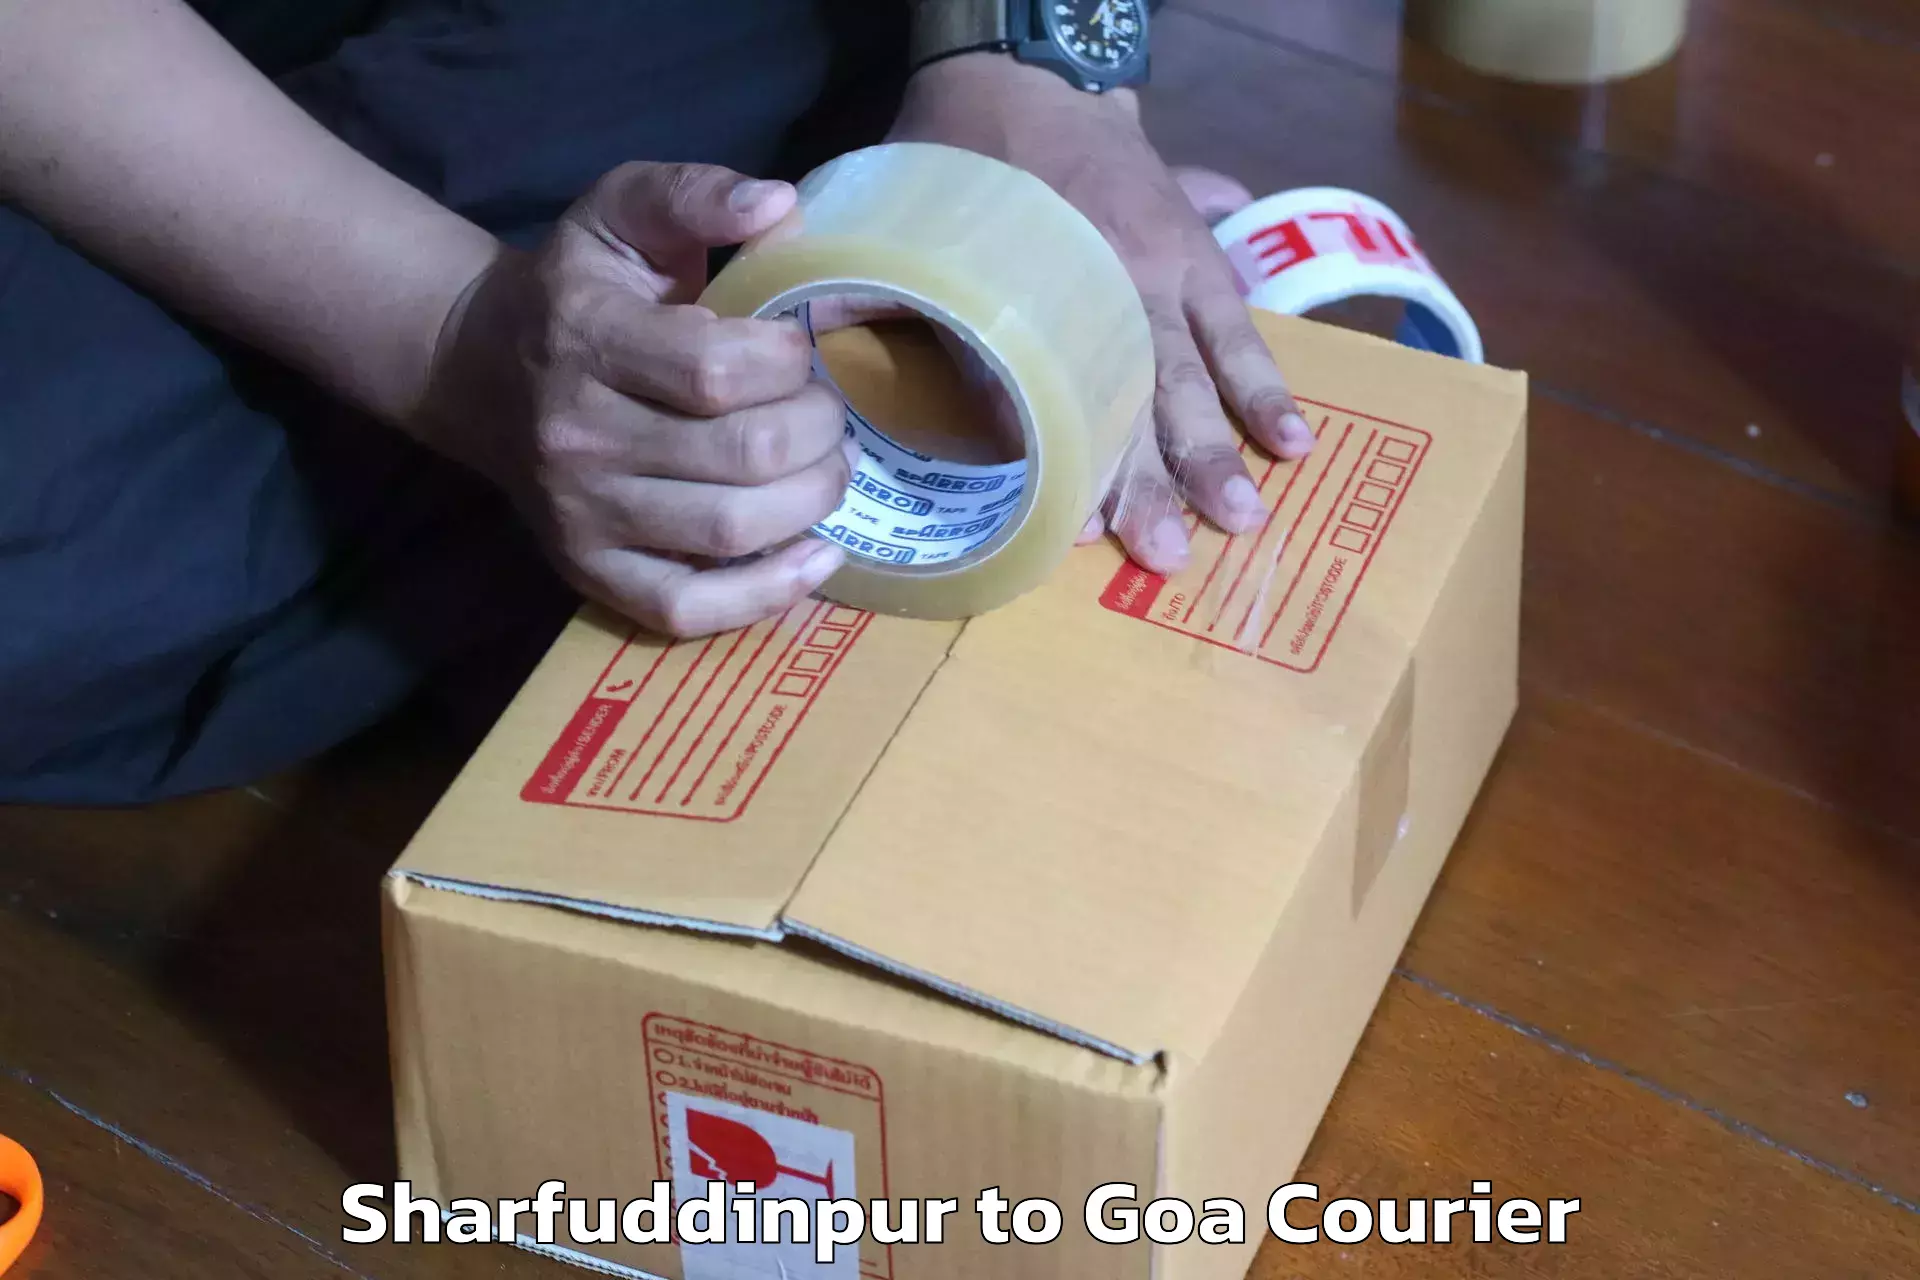 Efficient relocation services Sharfuddinpur to Goa University